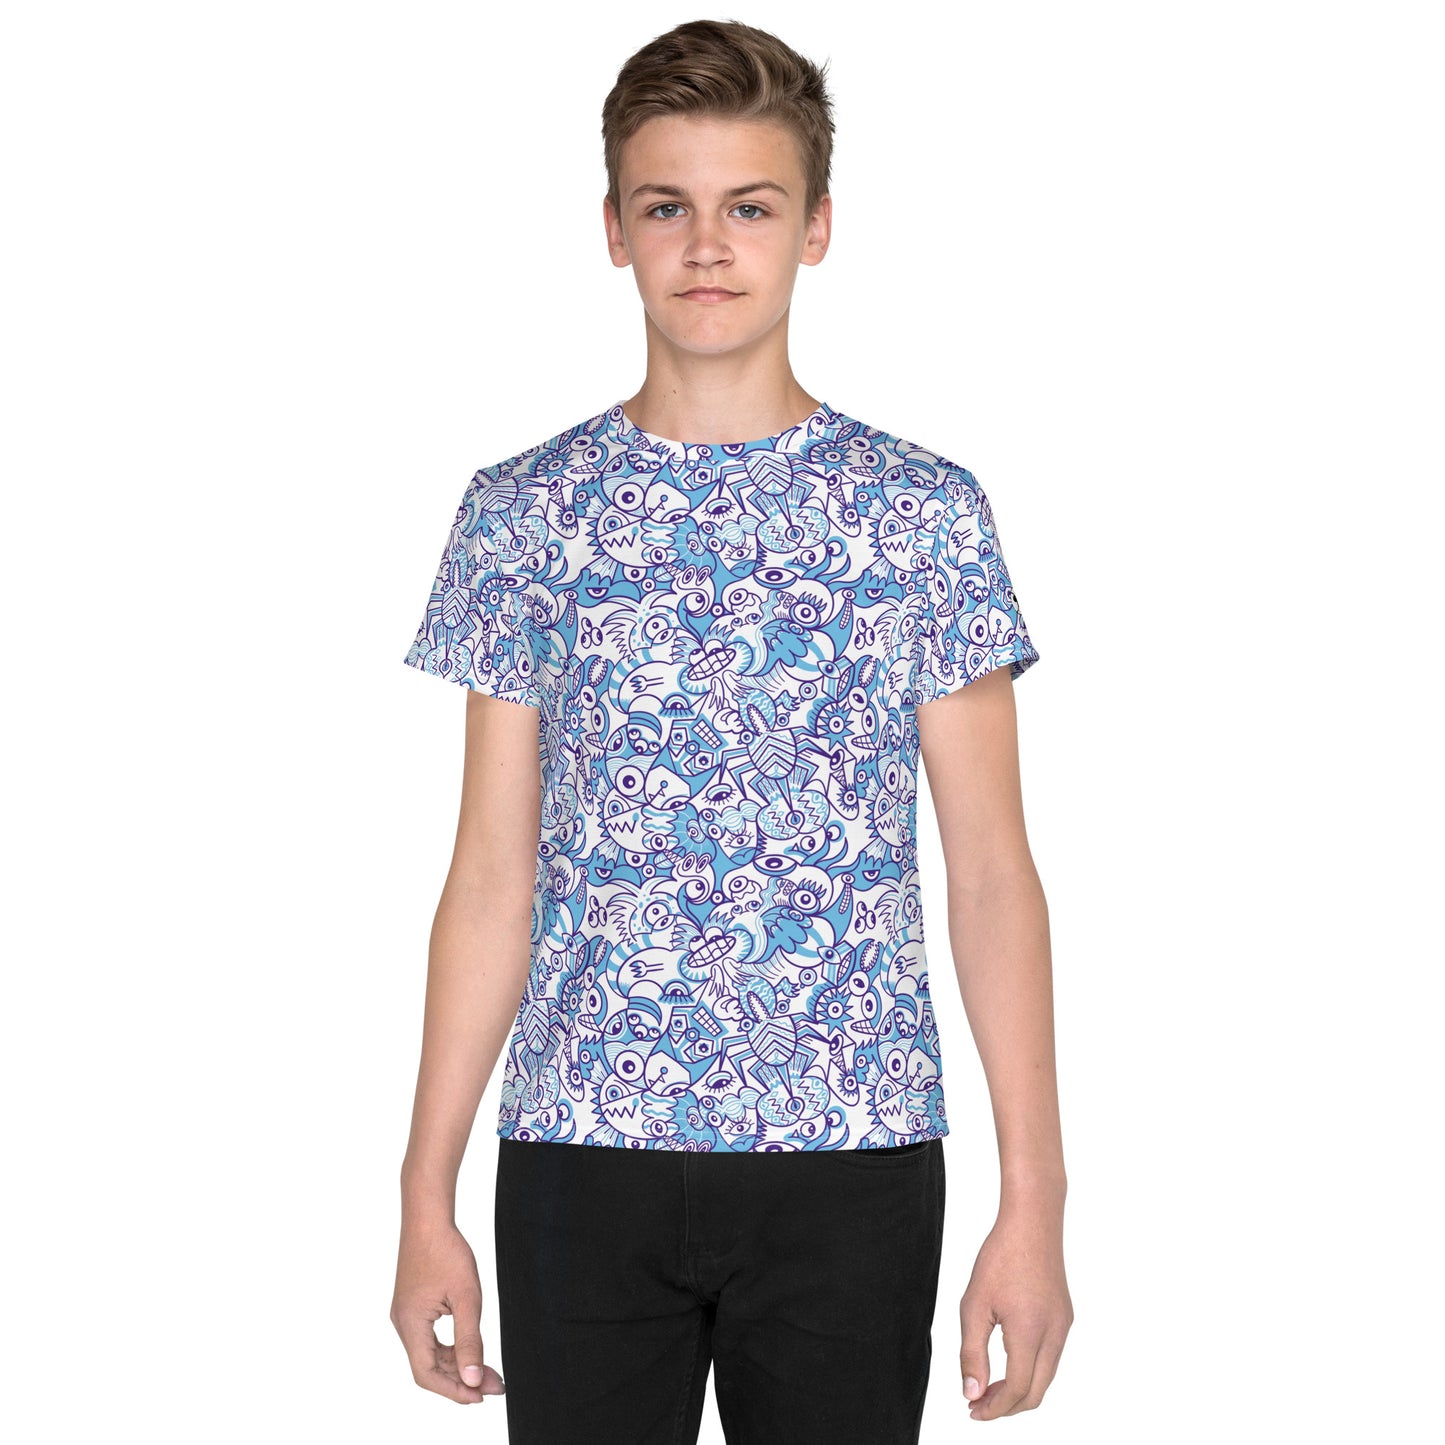 Whimsical Blue Doodle Critterscape pattern design - Youth crew neck t-shirt. Front view